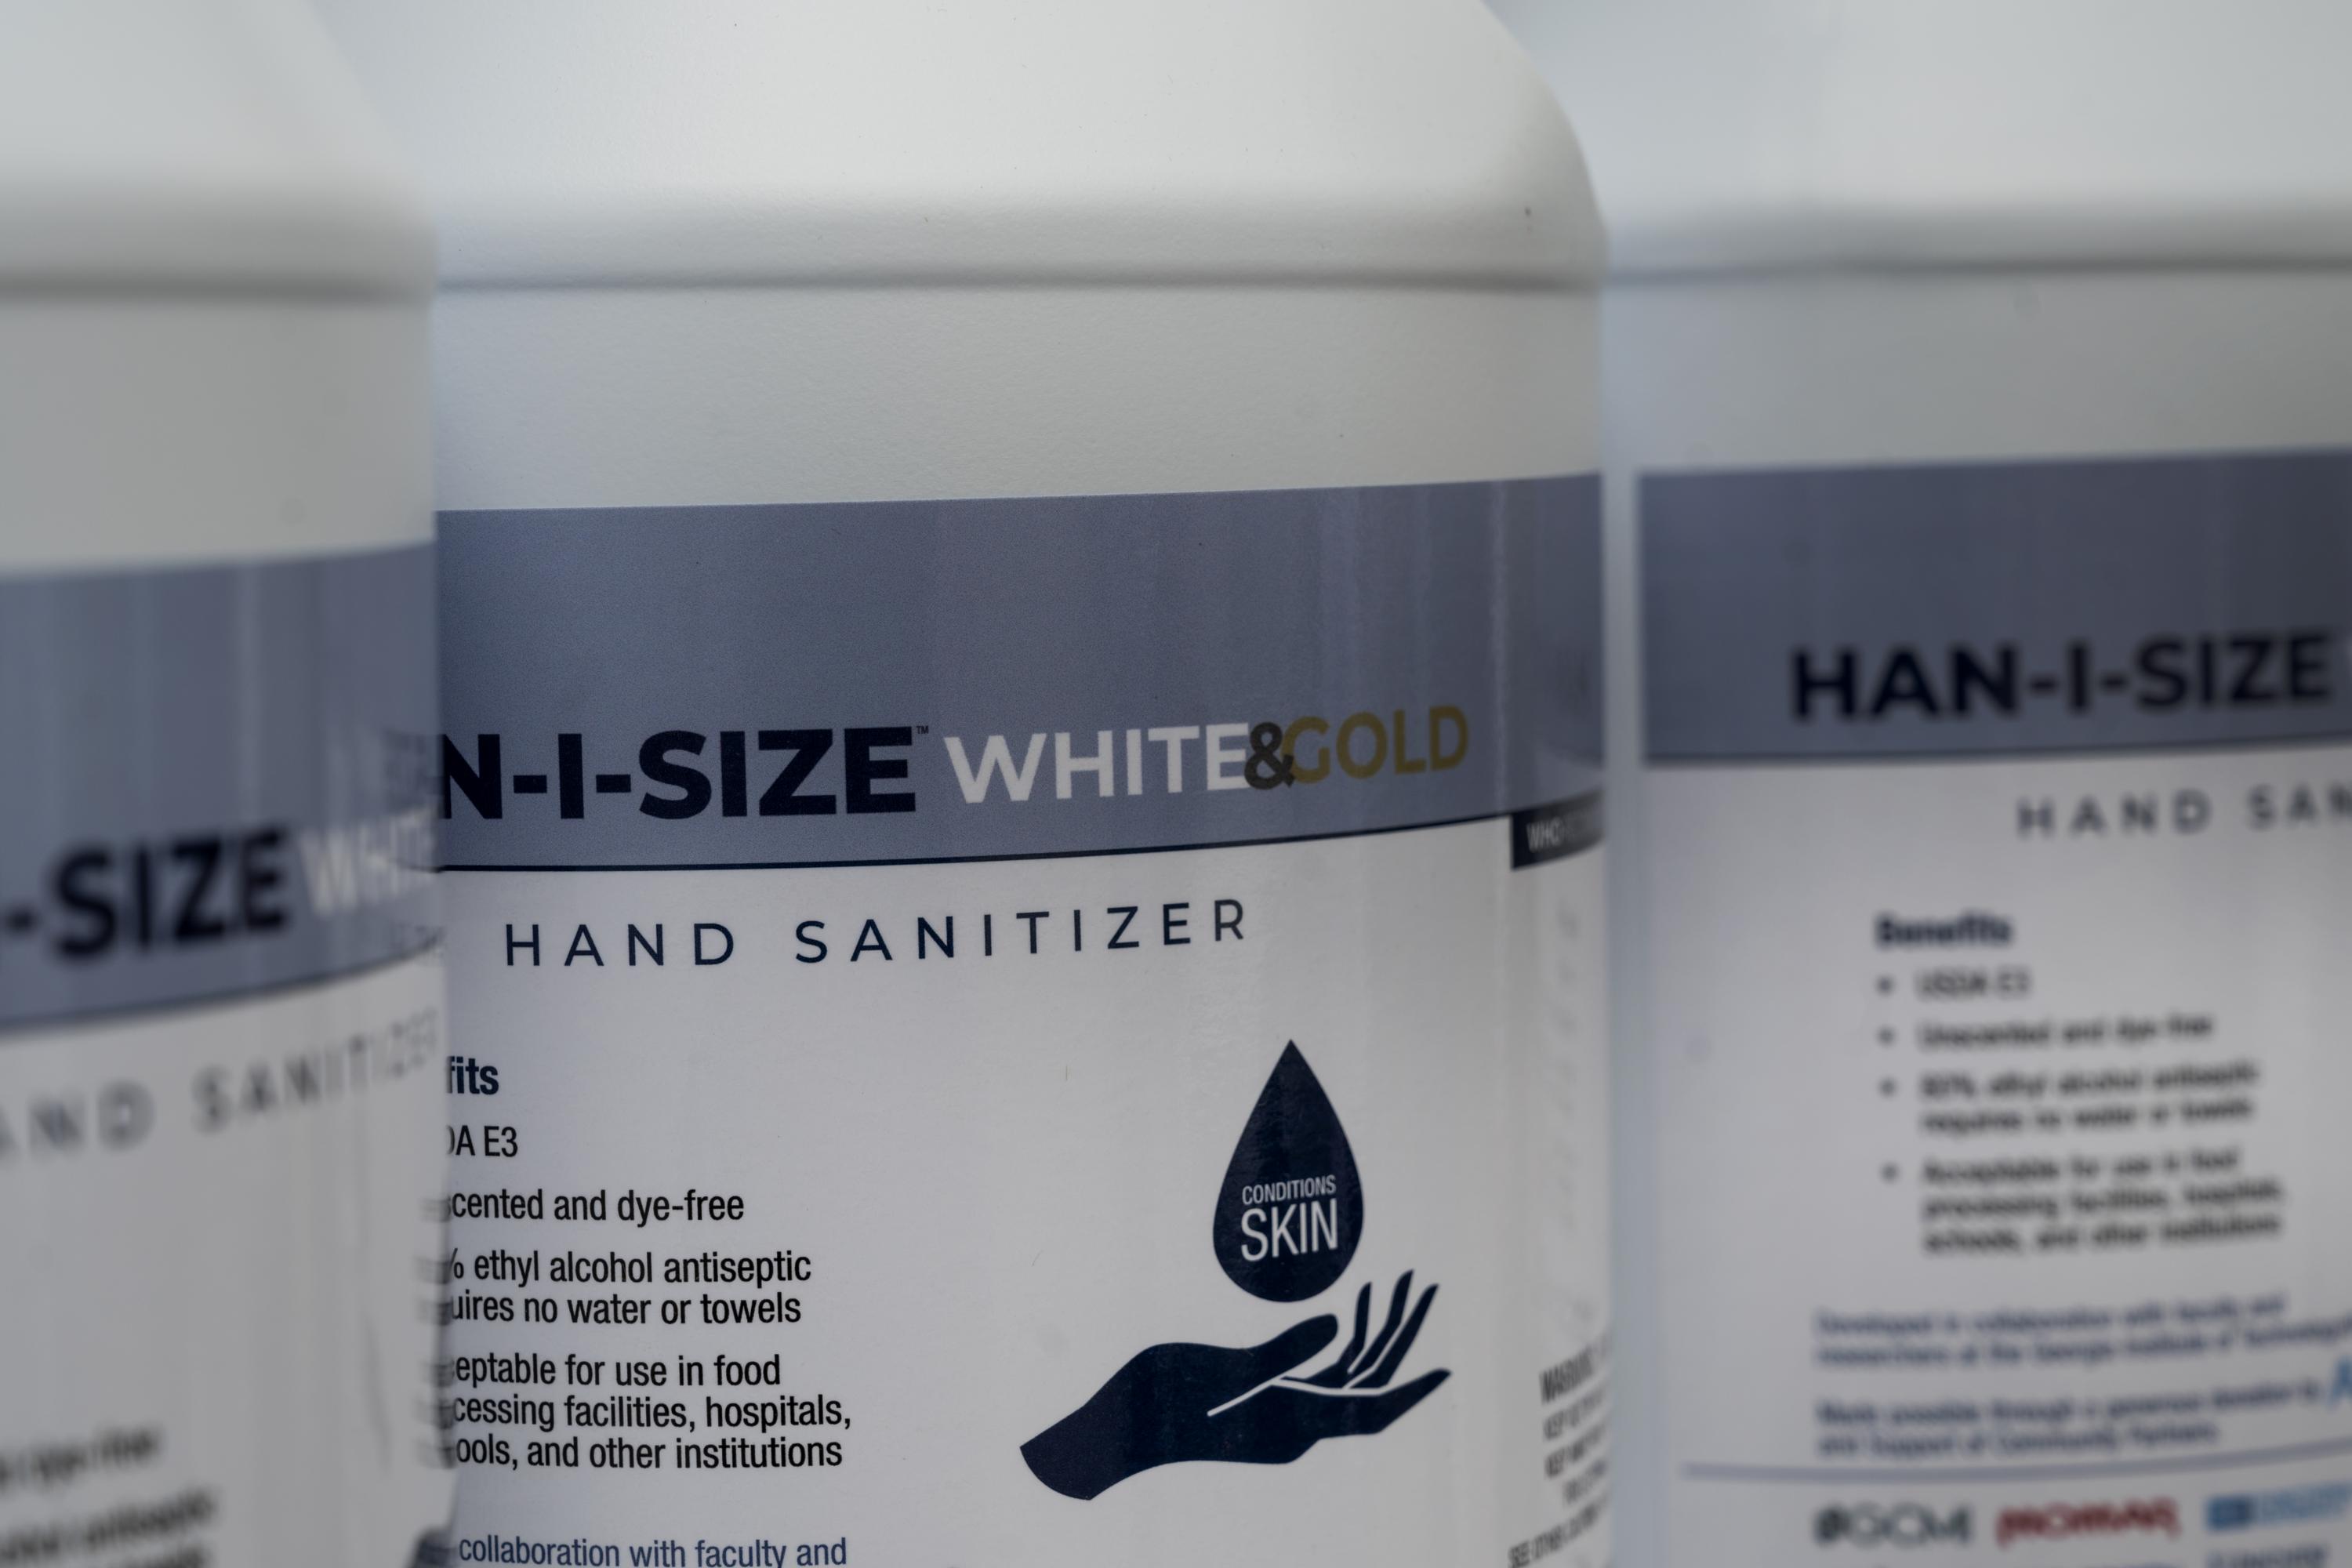 Hand sanitizer was about to run dangerously low across the U.S. but charitable volunteers from Georgia Tech rescued it by turning to fuel-grade ethanol and a special FDA waiver. Then they donated 7,000 gallons to hospitals and nursing homes. Credit: Georgia Tech / Christopher Moore